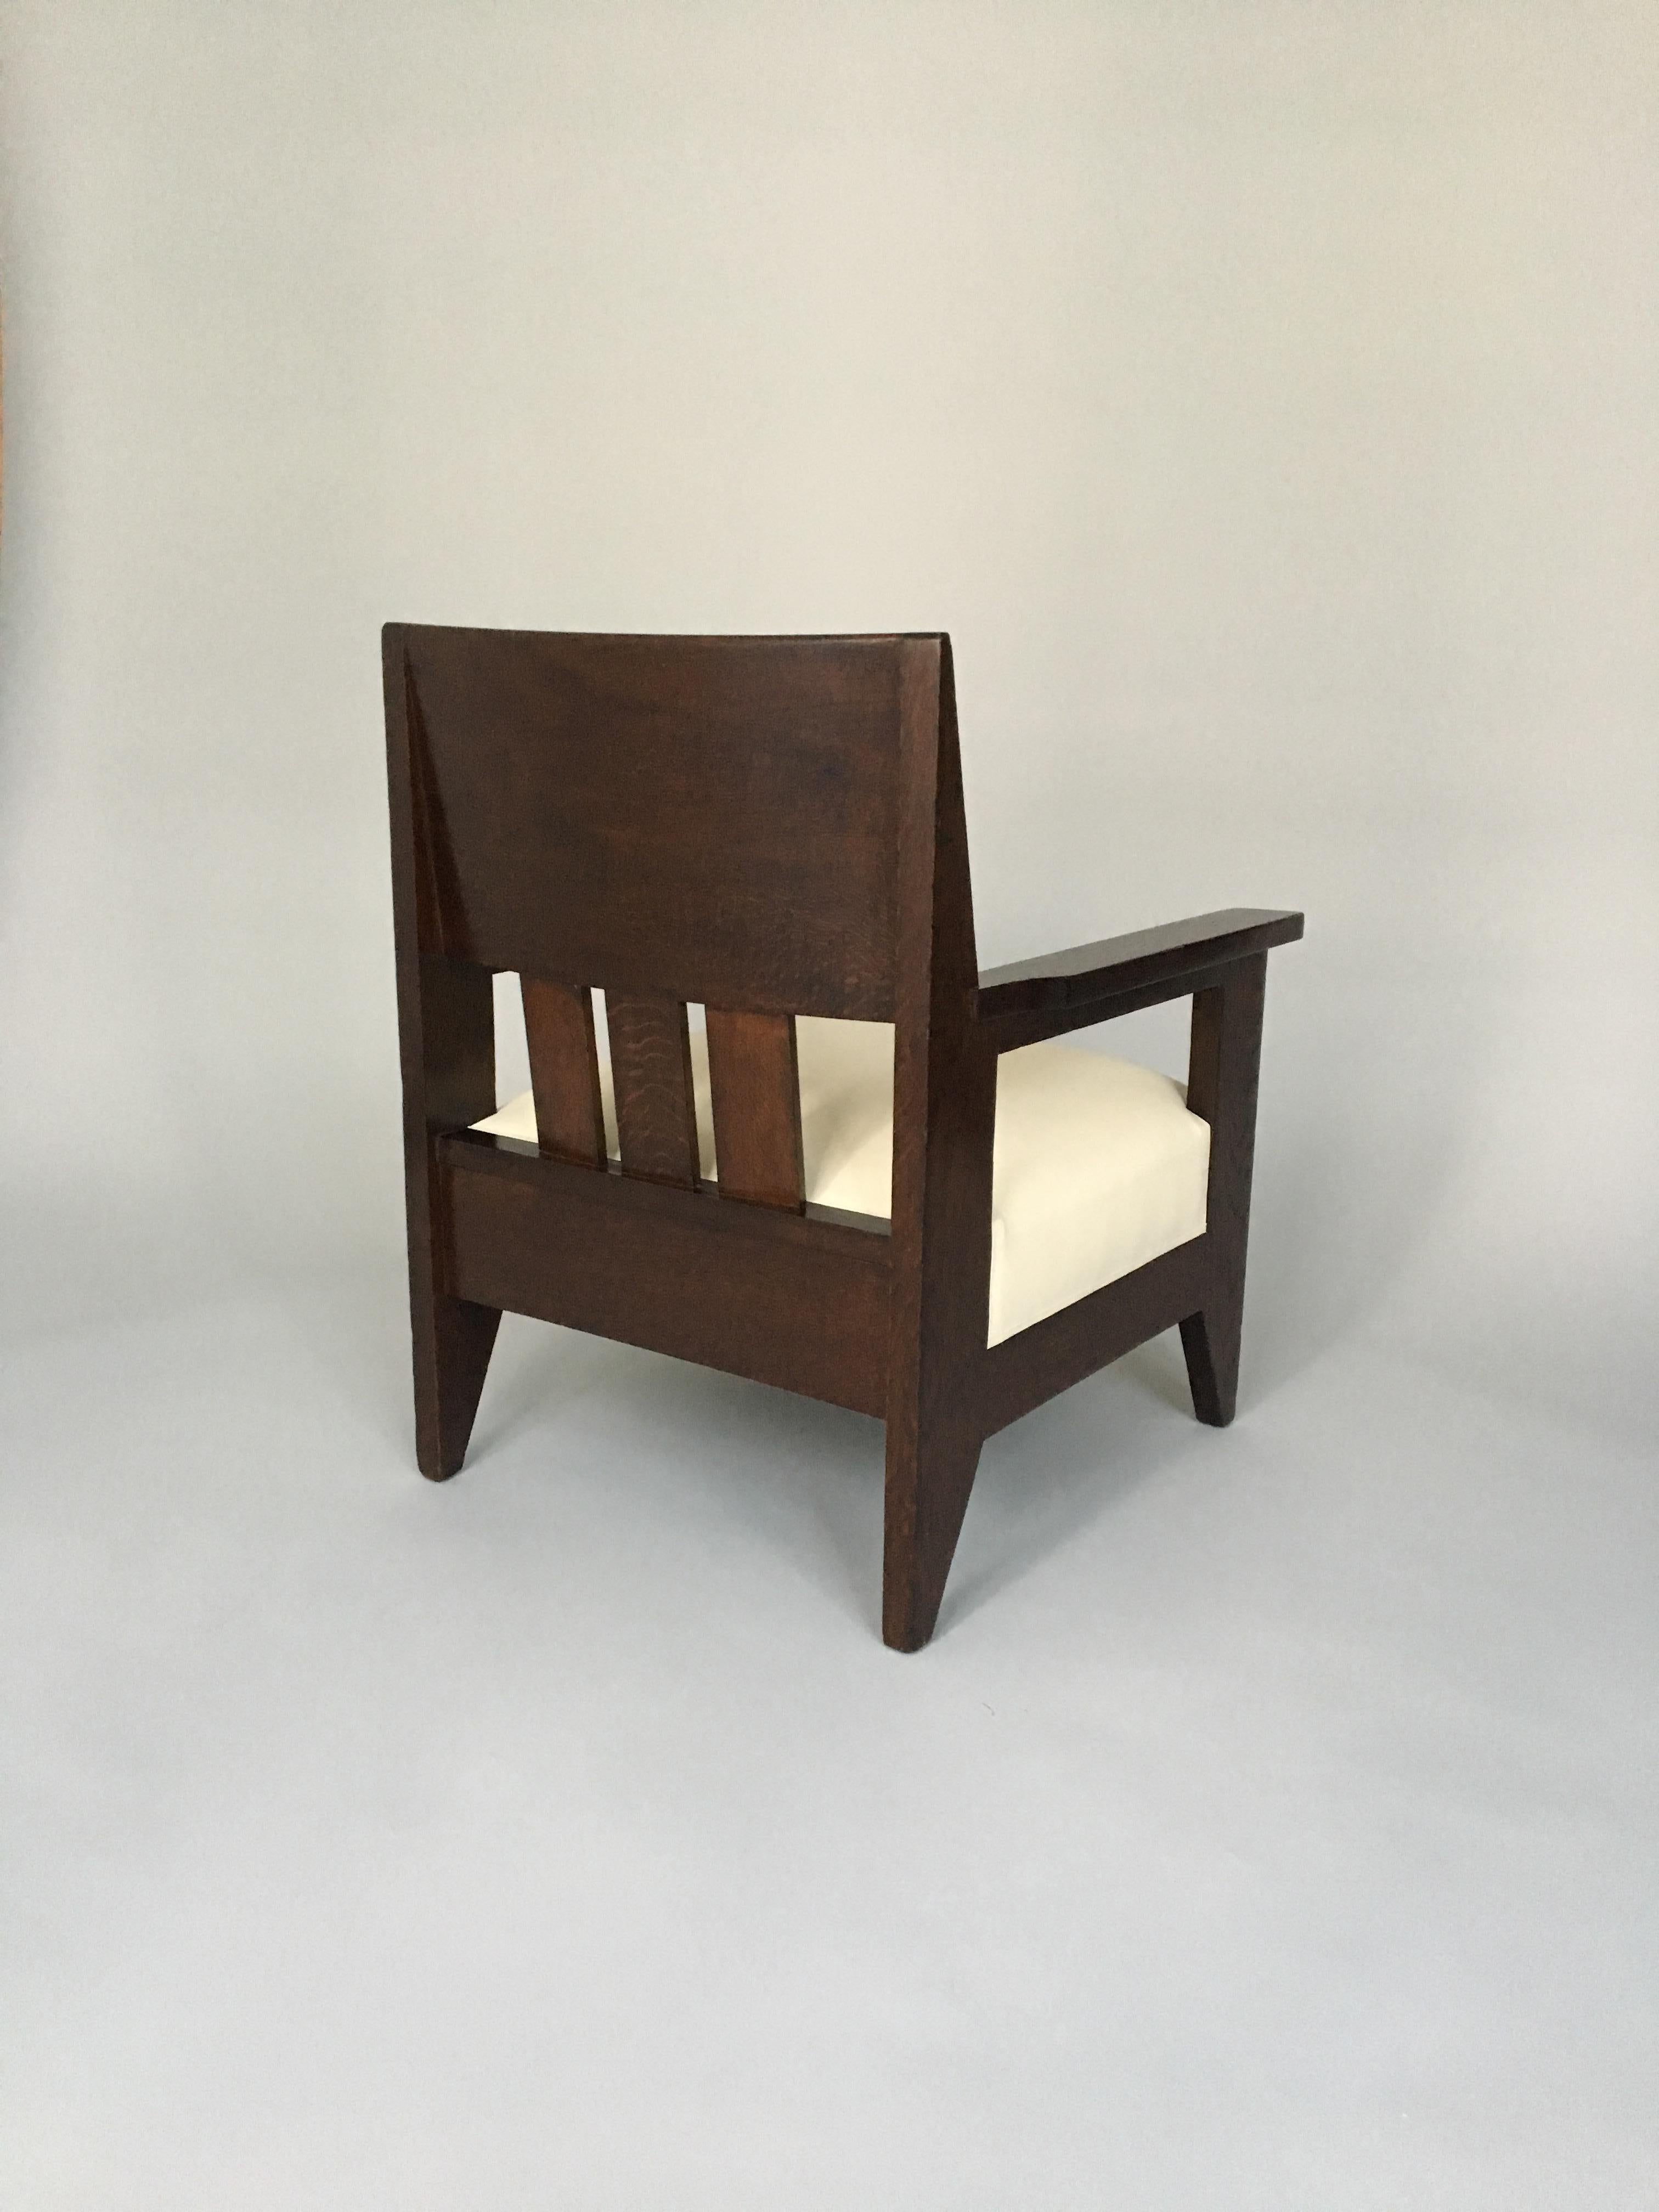 Here is a Hendrik Wouda armchair in oak from 1921.
Hendrik Wouda was one of the most well known architect/Designers from The Hague School in Holland. The armchair has the Pander & Son stamp underneath. The armchair is documented in several books